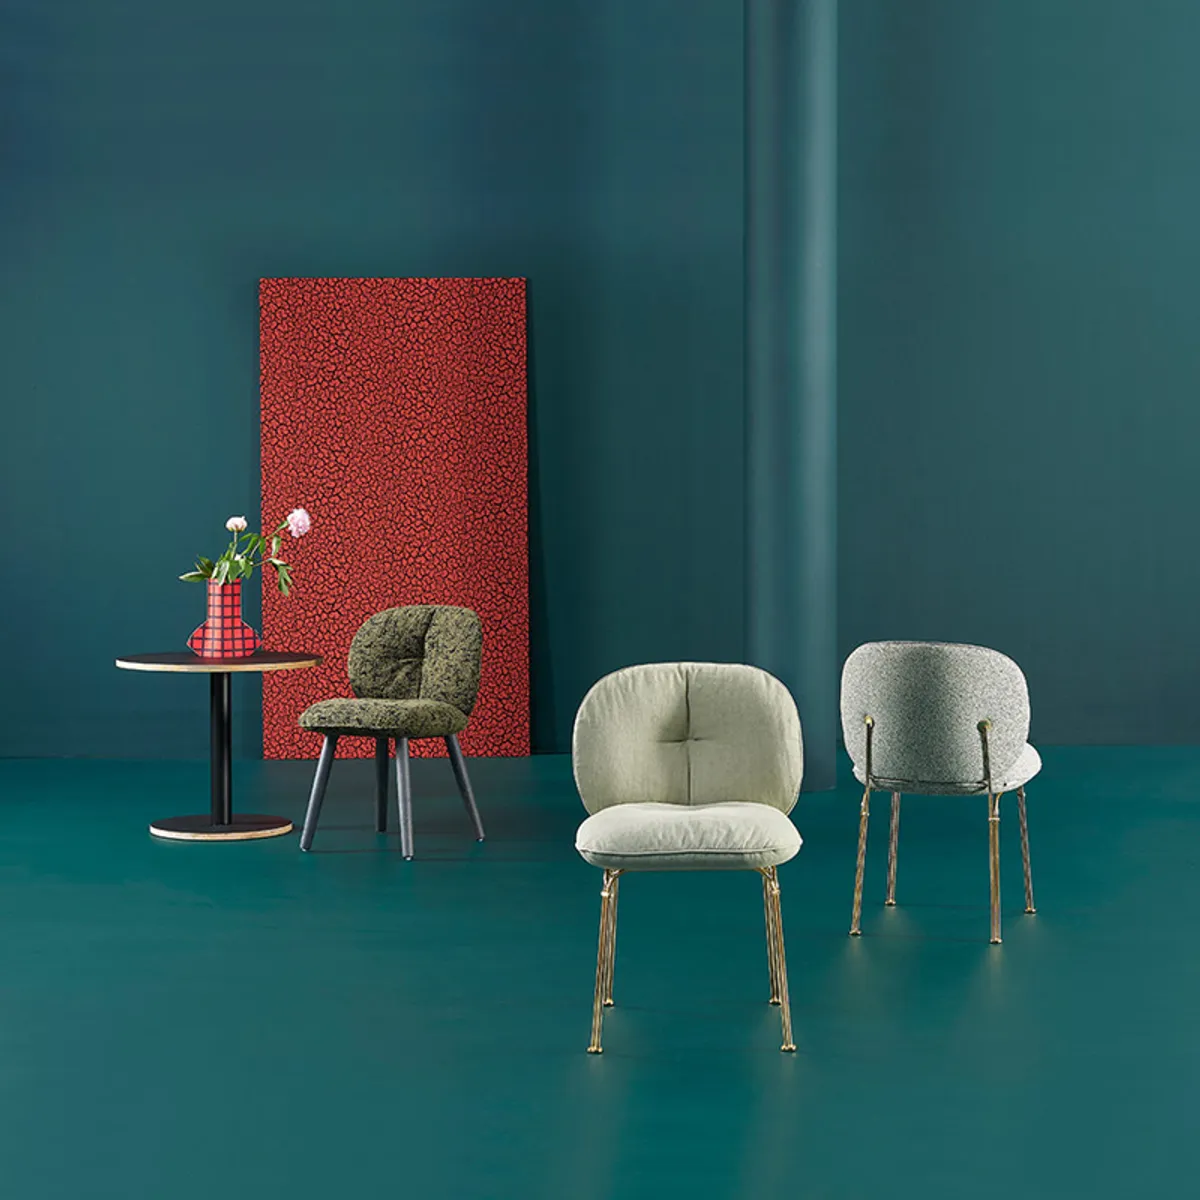 Mullit Side Chair Winner Of Best Of Year Design Award Upholstered Chair With Metal Or Wooden Legs Insideoutcontracts